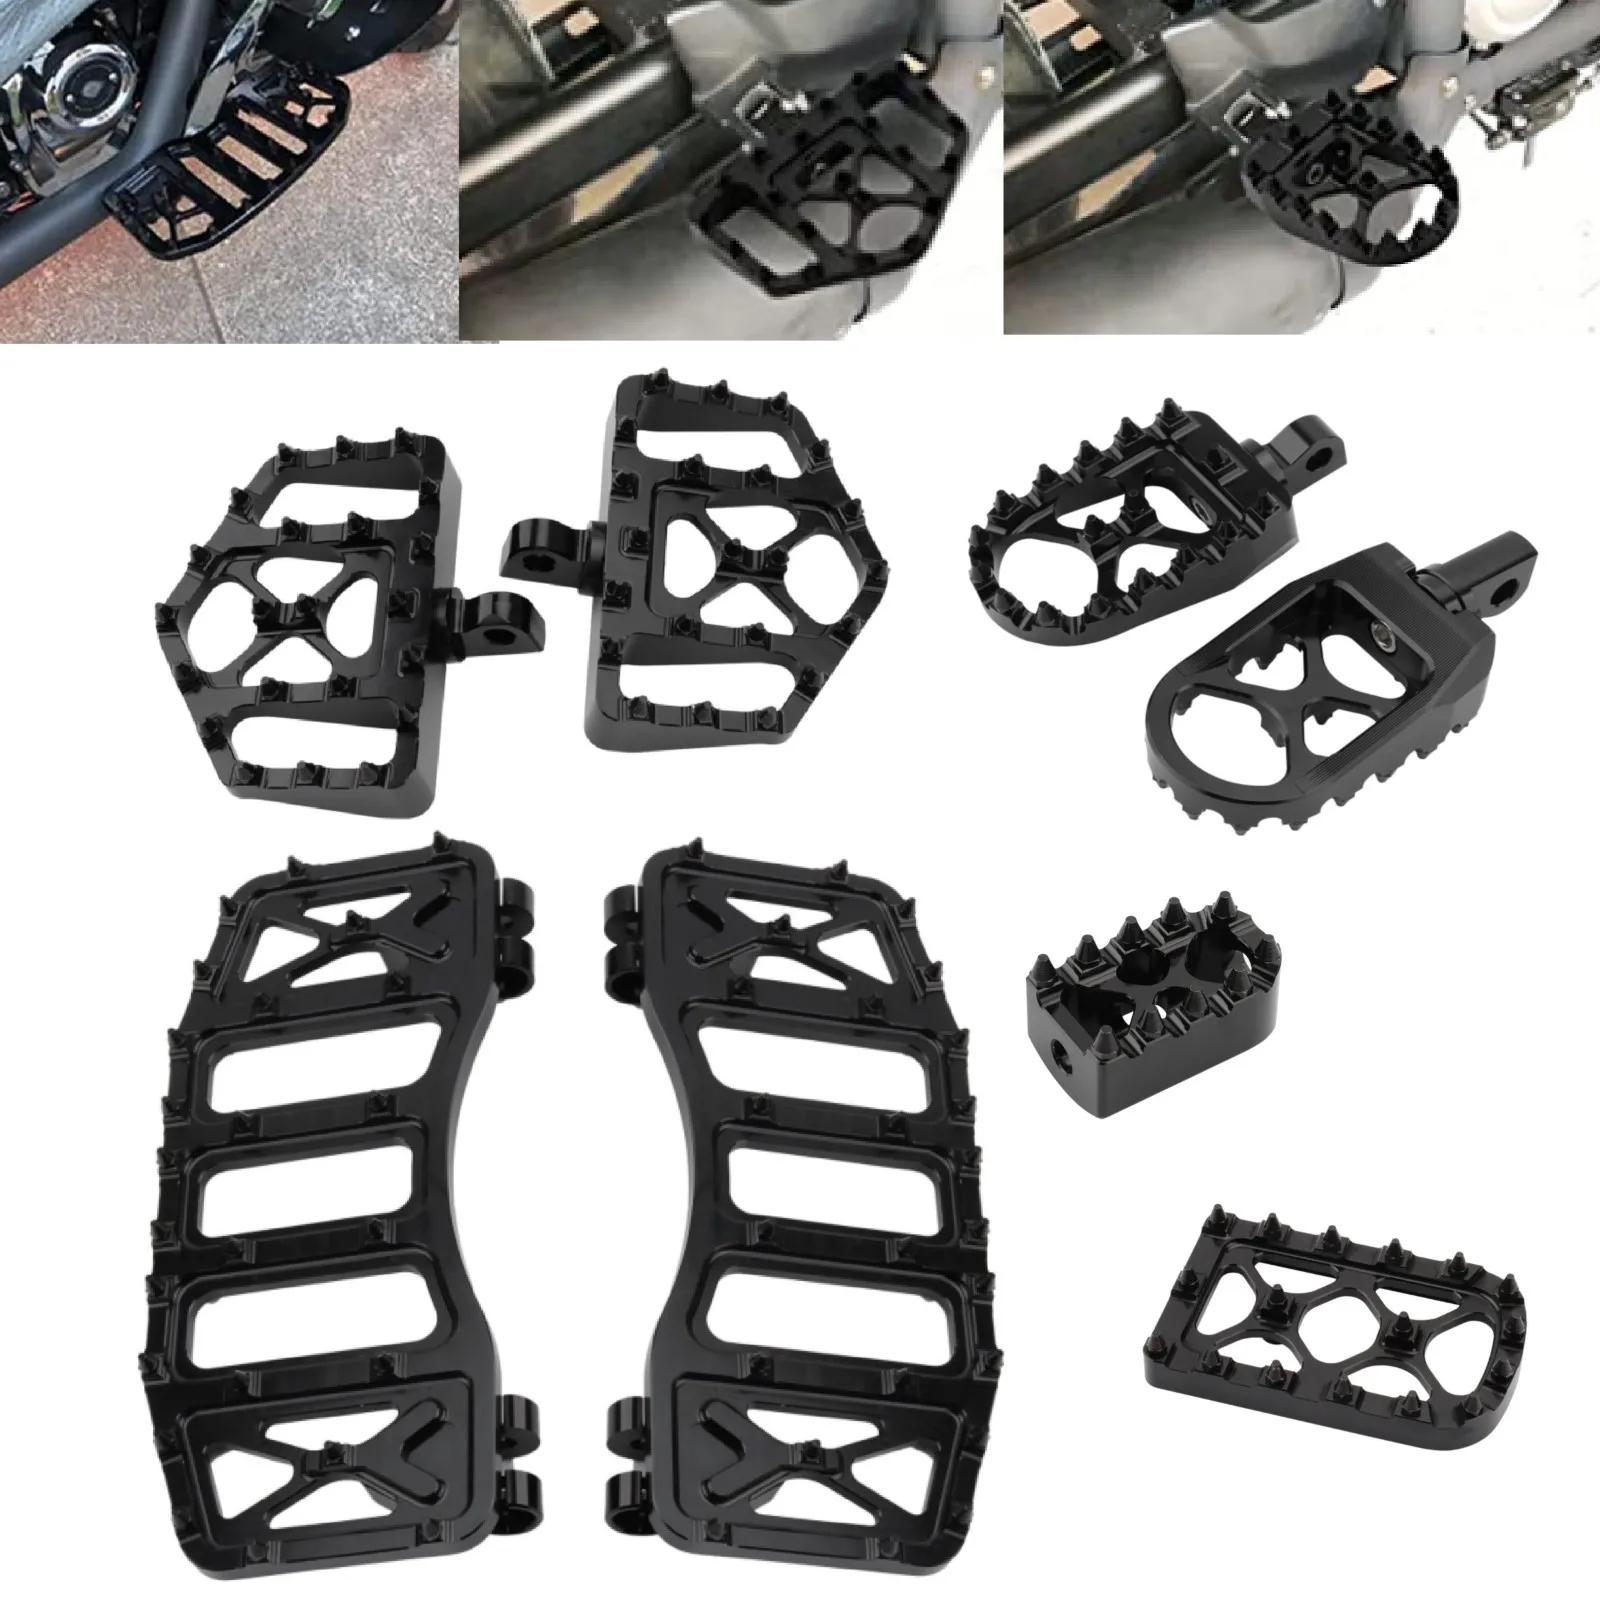 

MX Style Foot pegs Front Floorboards Footrests Pedal CNC Black For Harley Touring Road King Road Glide Softail FLST Dyna FLD Tri